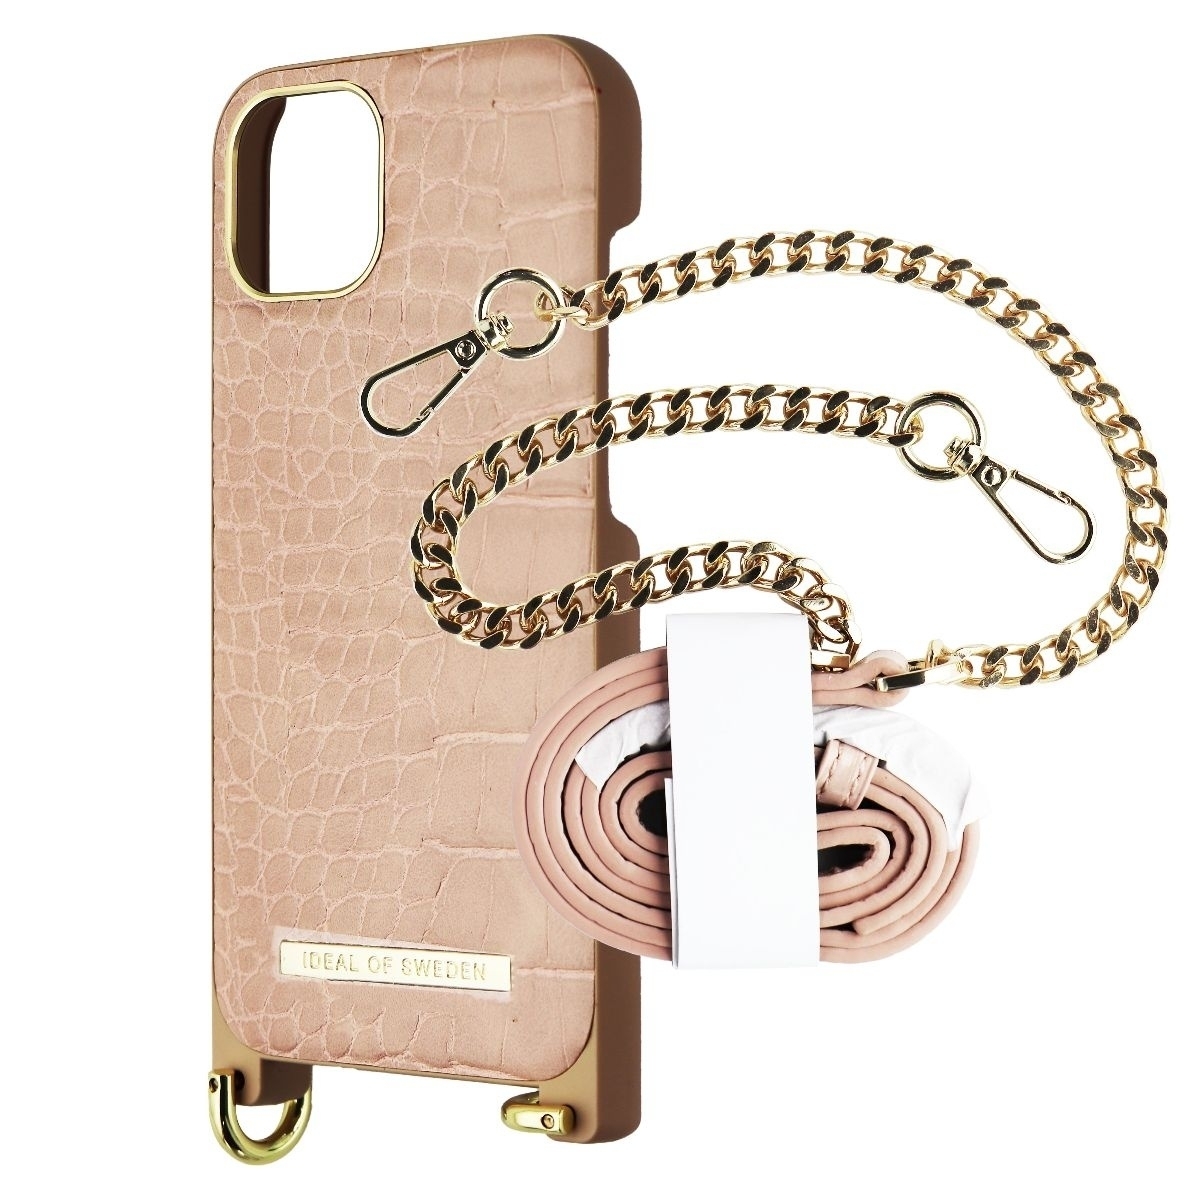 IDeal Of Sweden Atelier Necklace Case For IPhone 13 - Misty Rose Croco